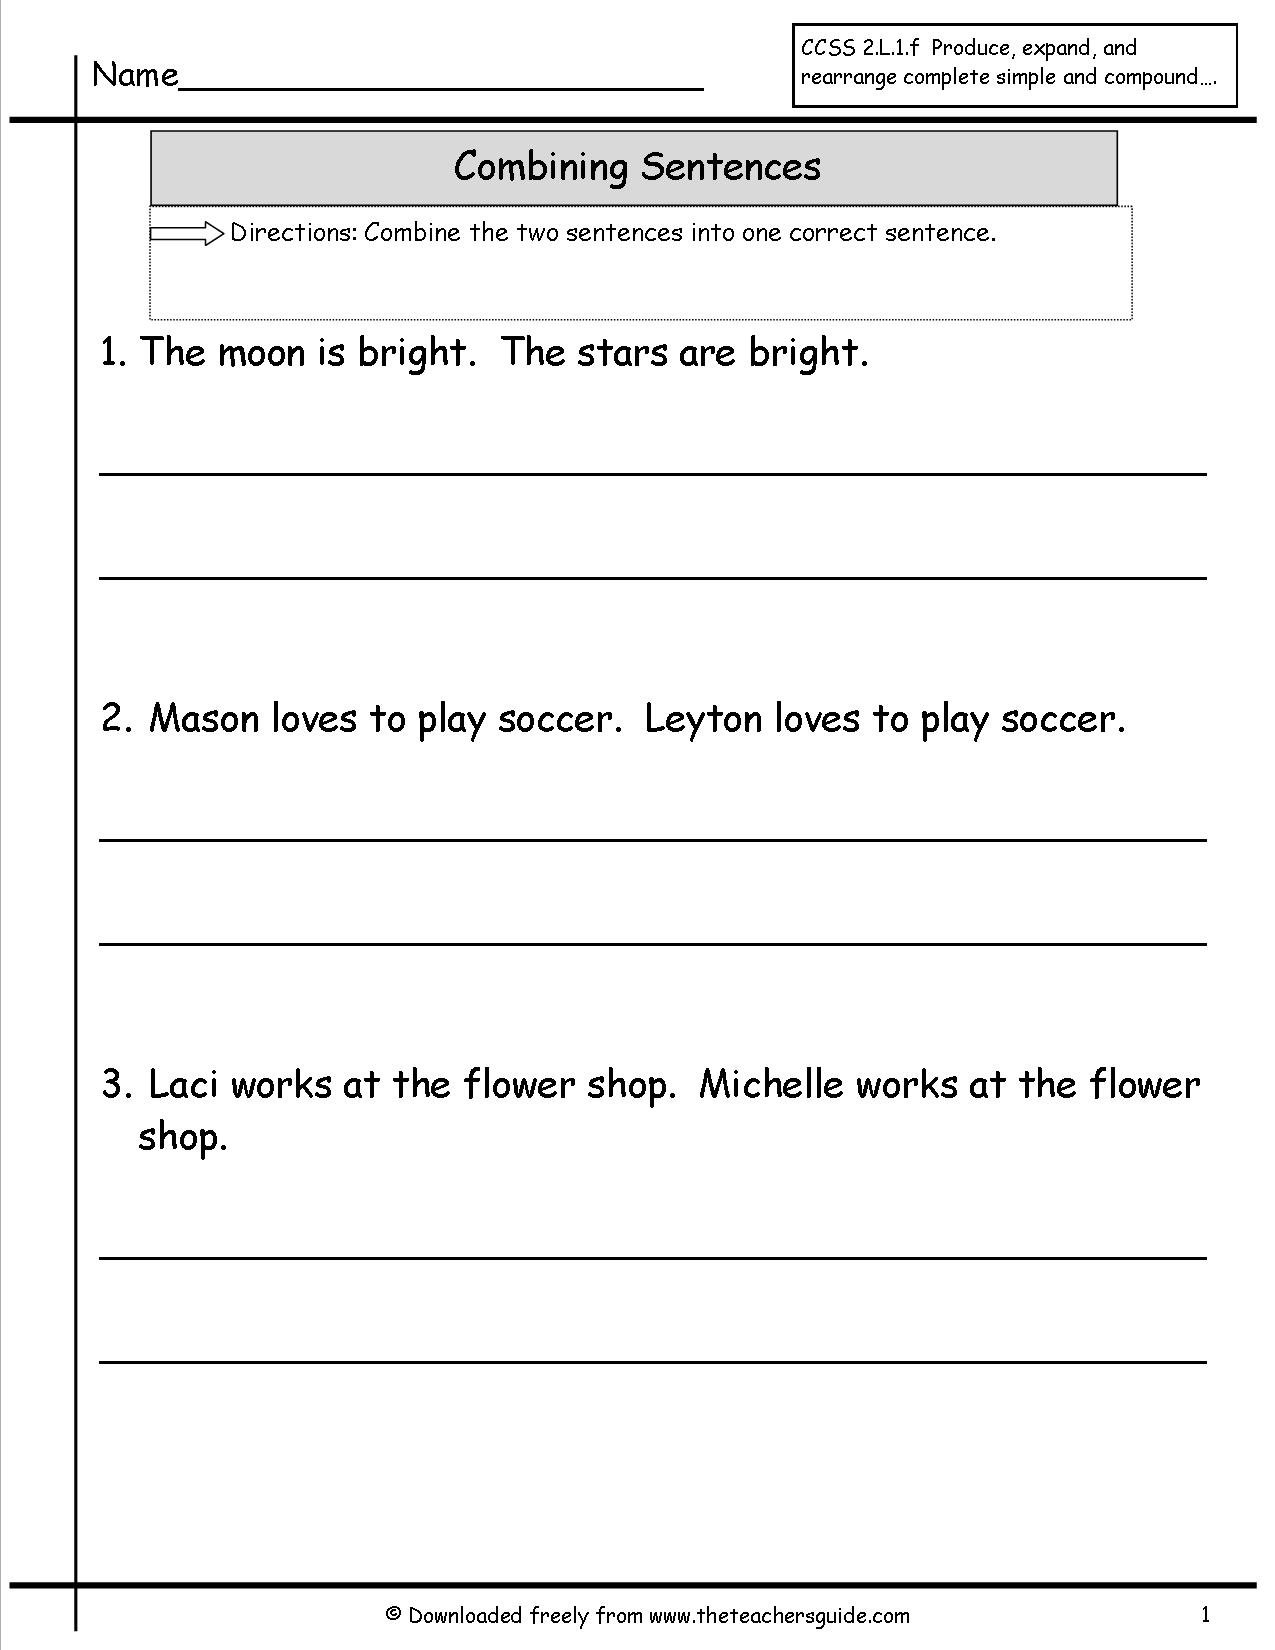 Sentences Worksheets From The Teacher's Guide With Combining Sentences Worksheet